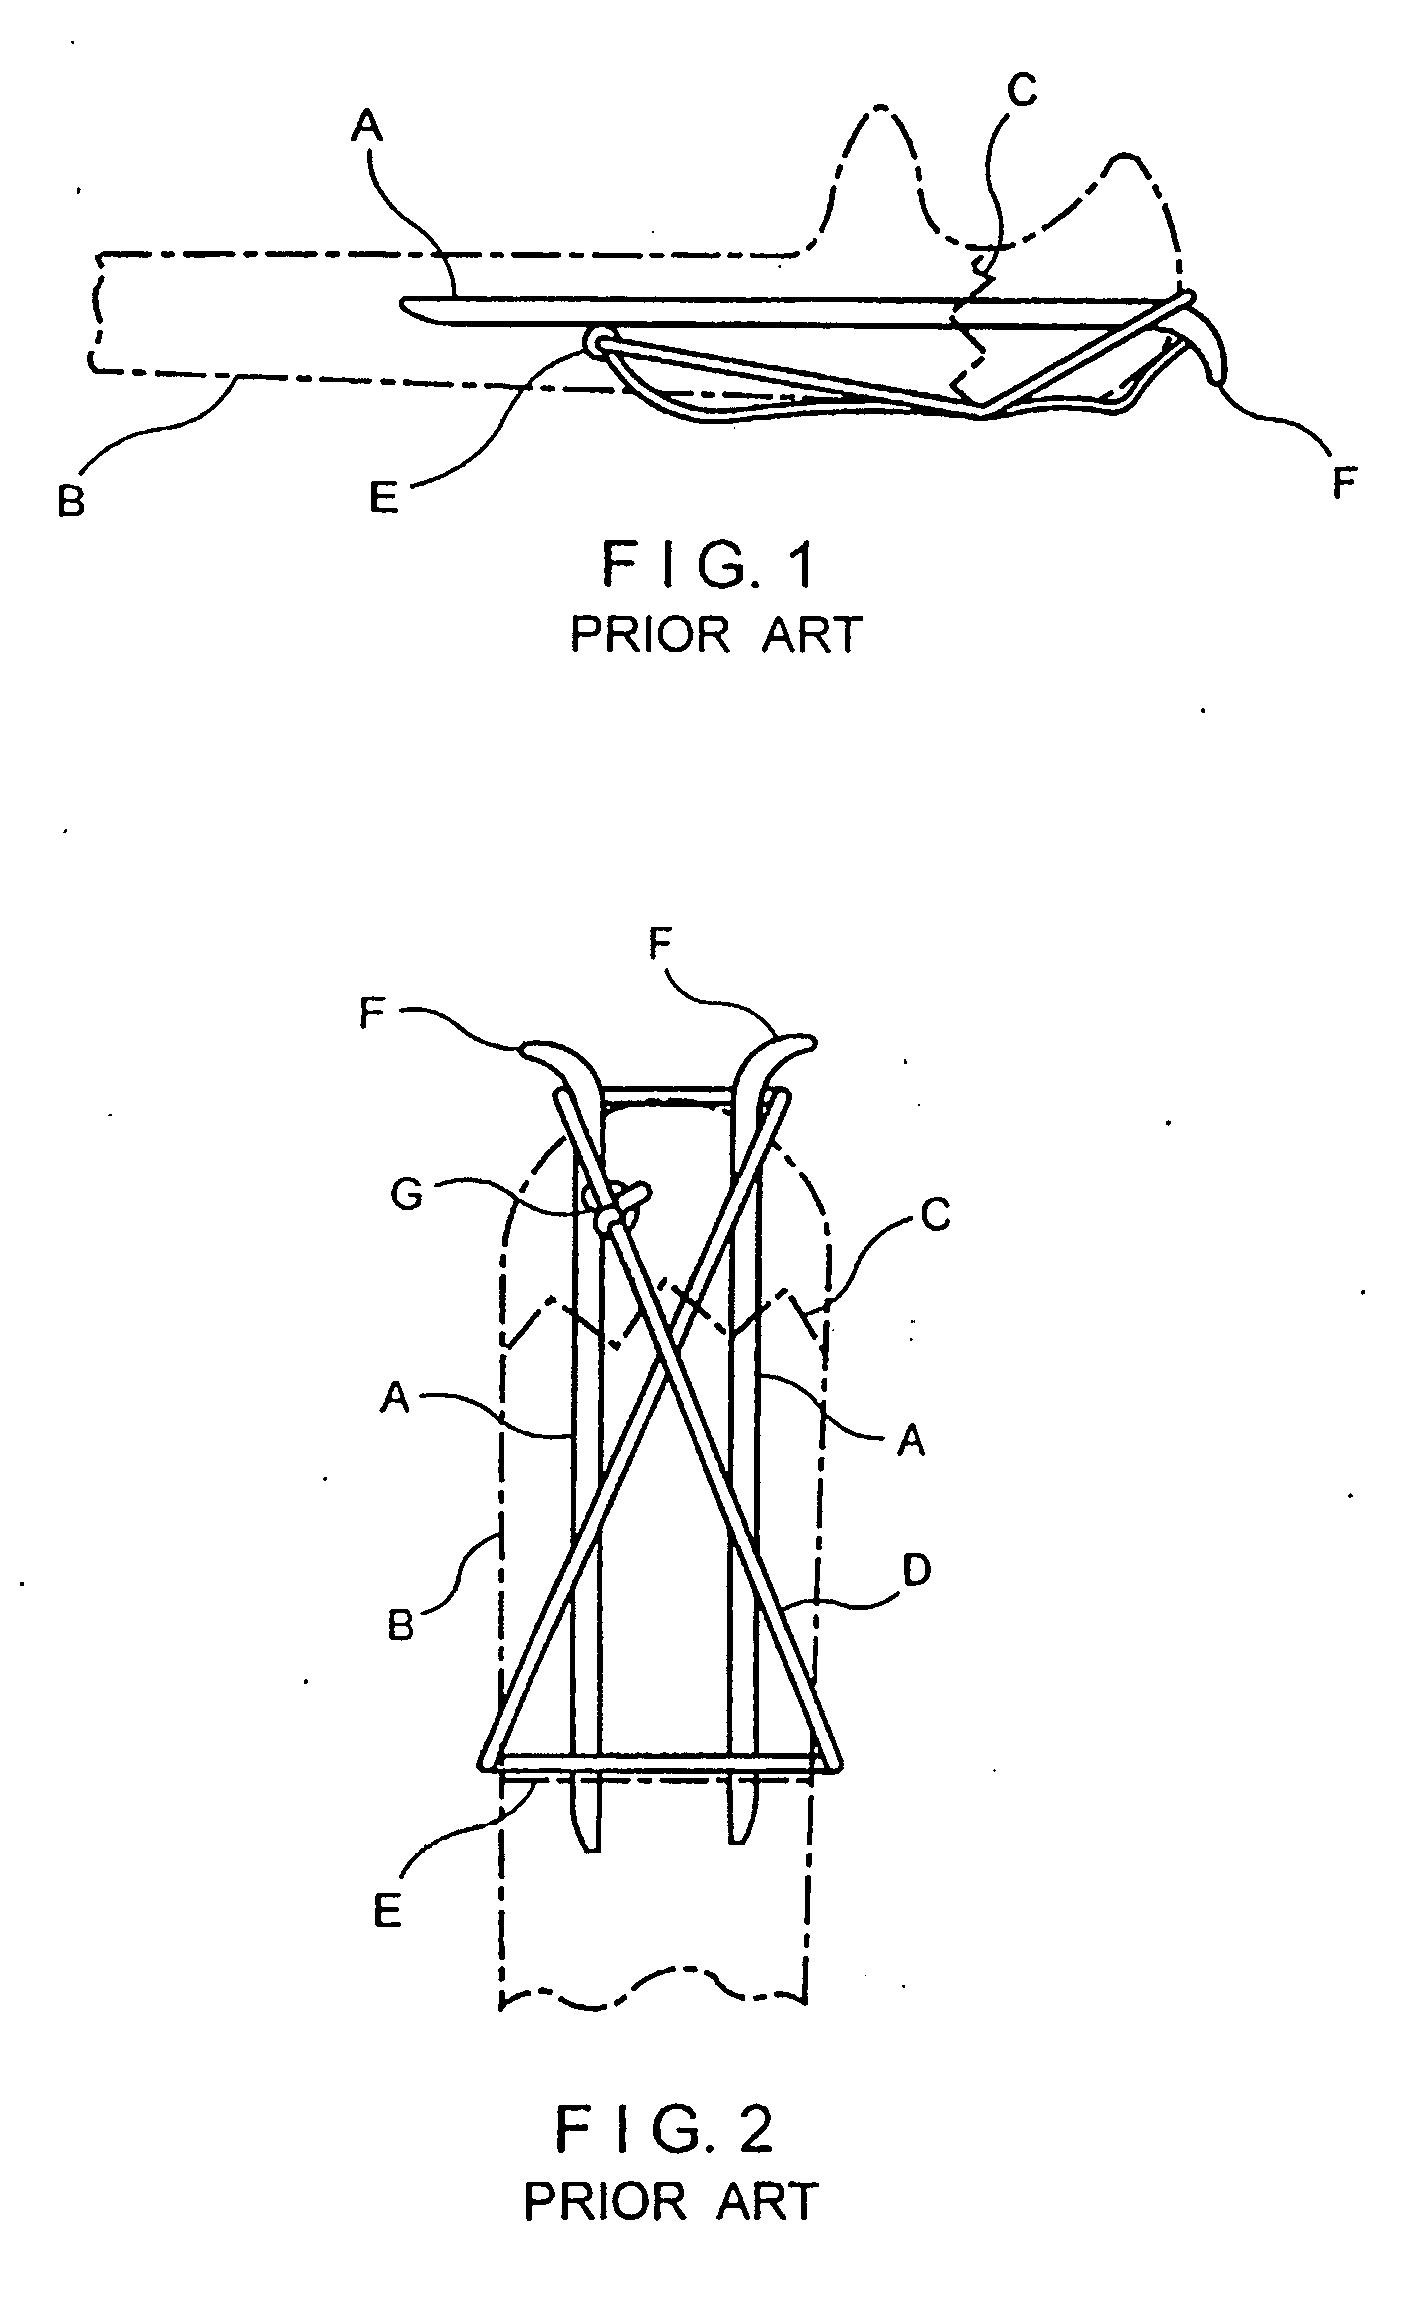 Implant device for applying compression across a fracture site